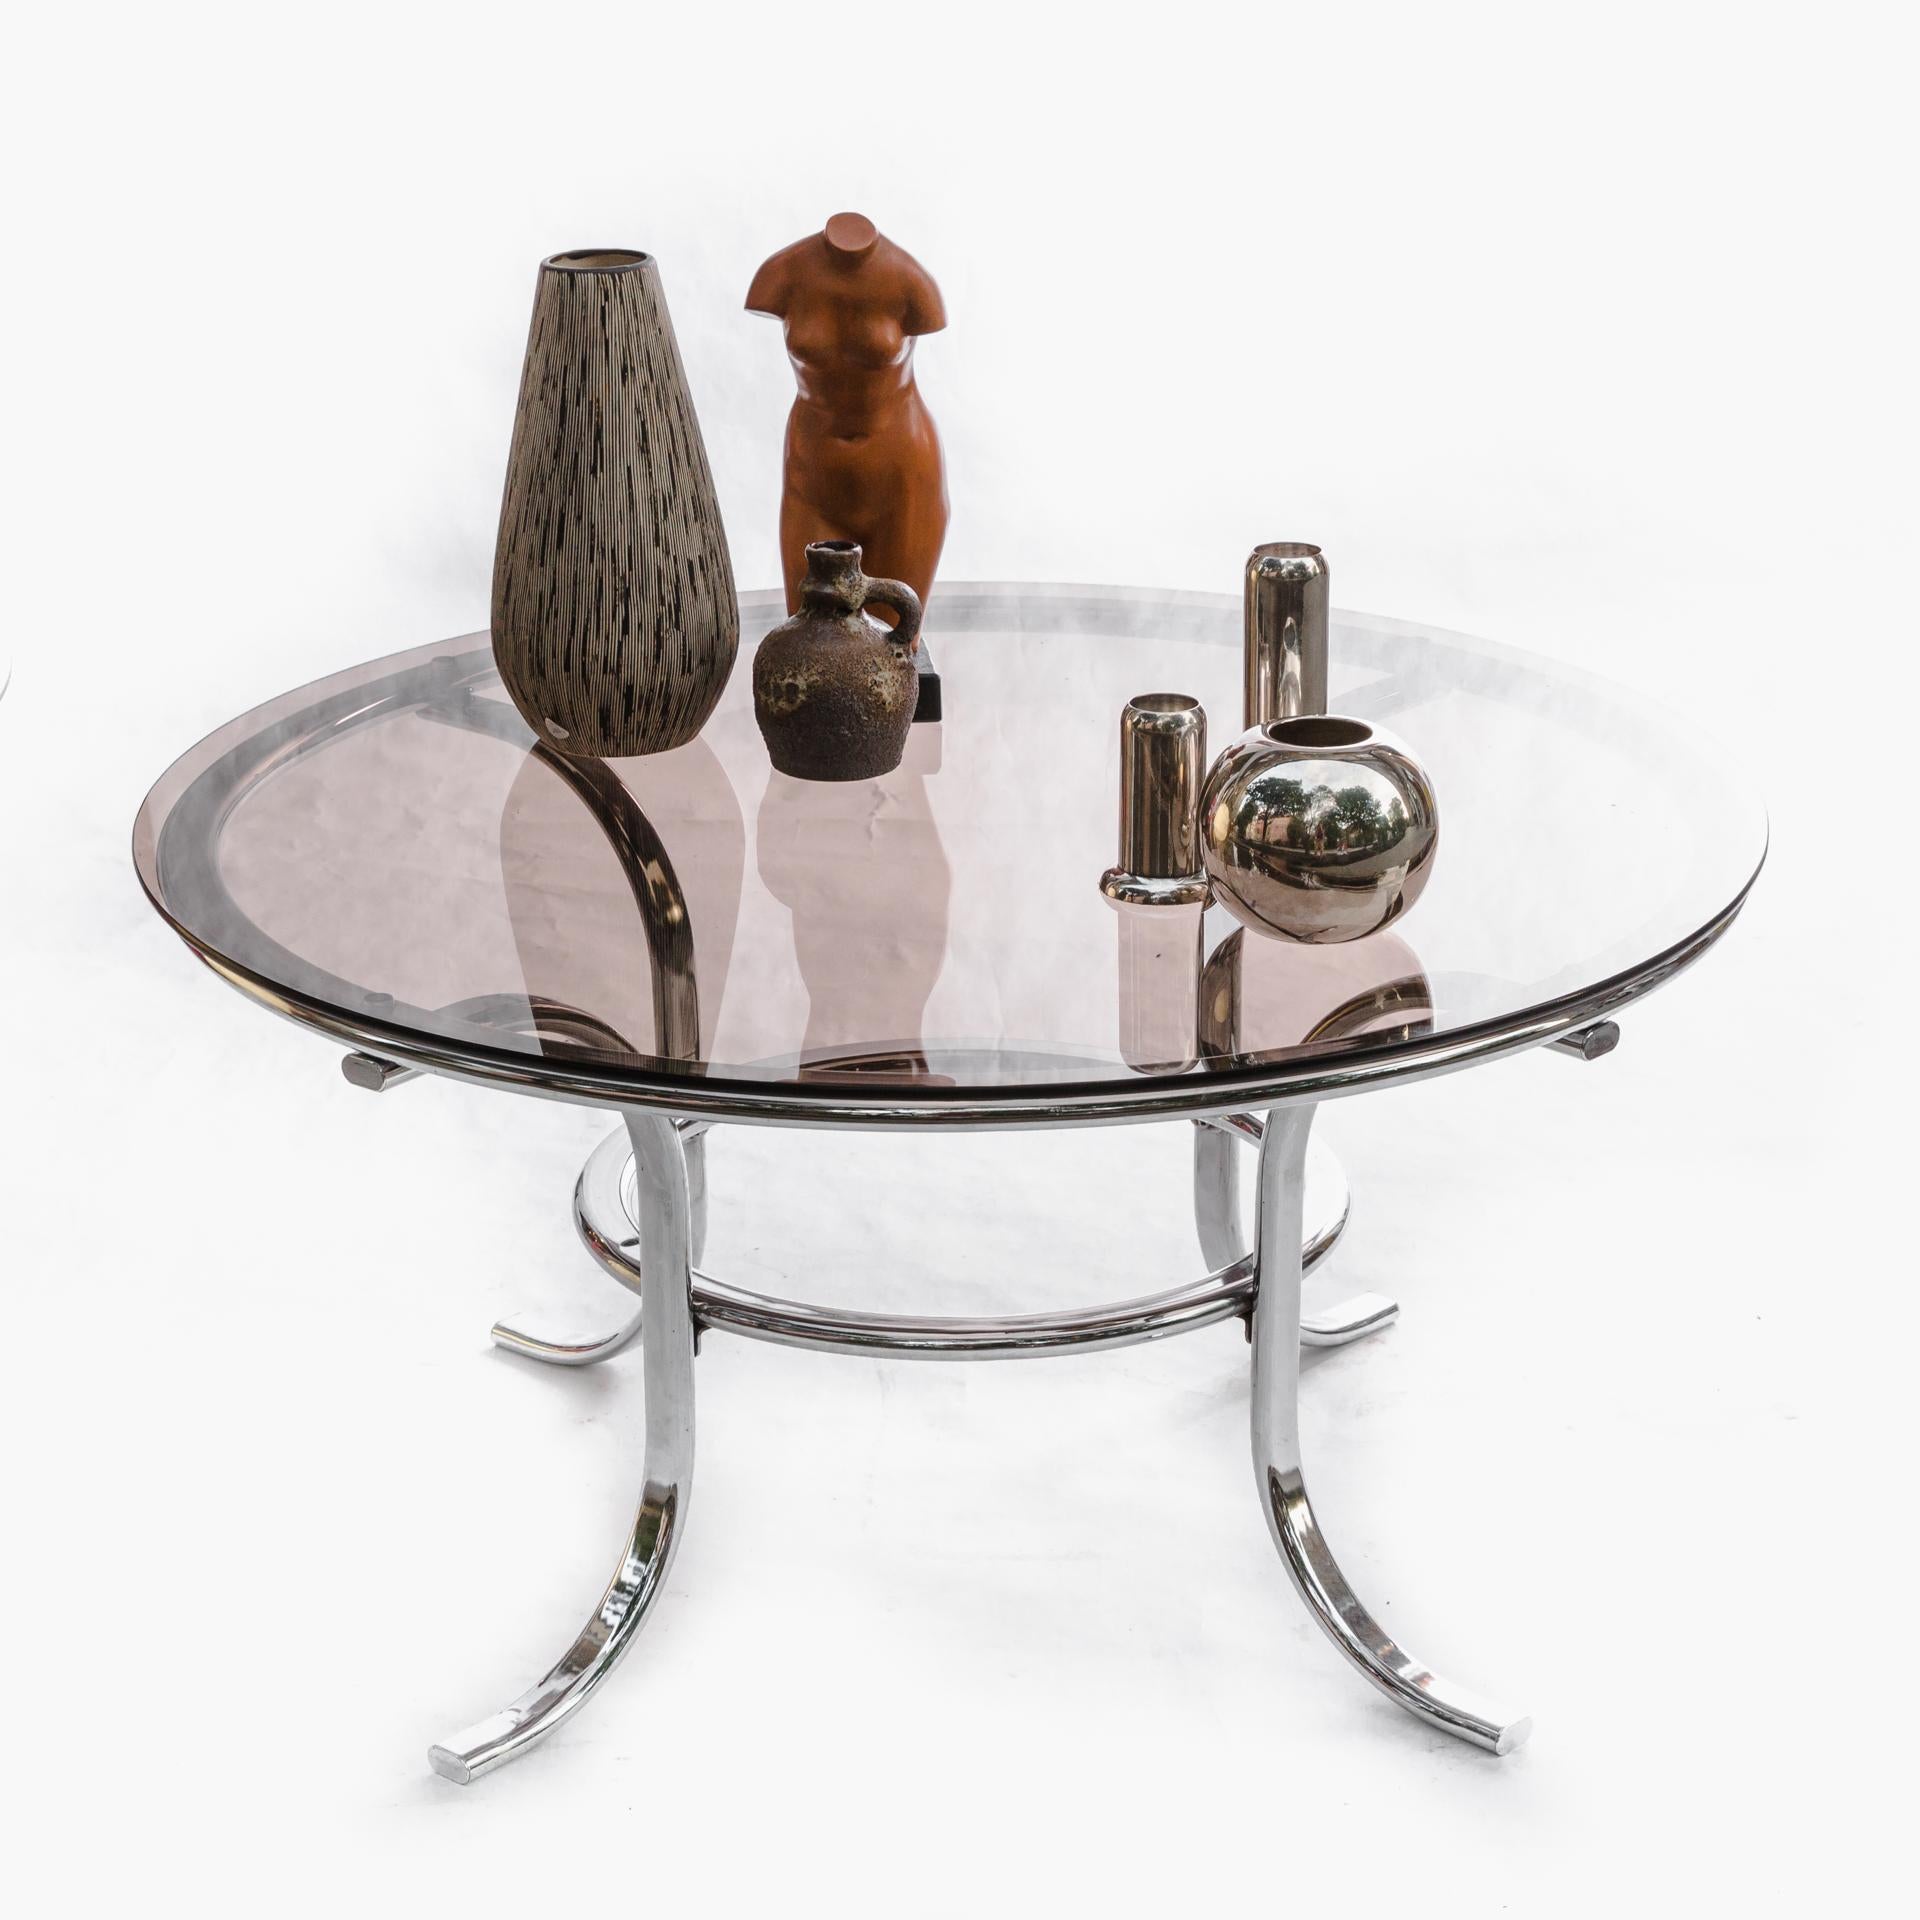 Round coffee table from the 1970s.

The table structure is made of bent chrome tubes. Round smoke glass top.

The furniture is an example of modernist design.